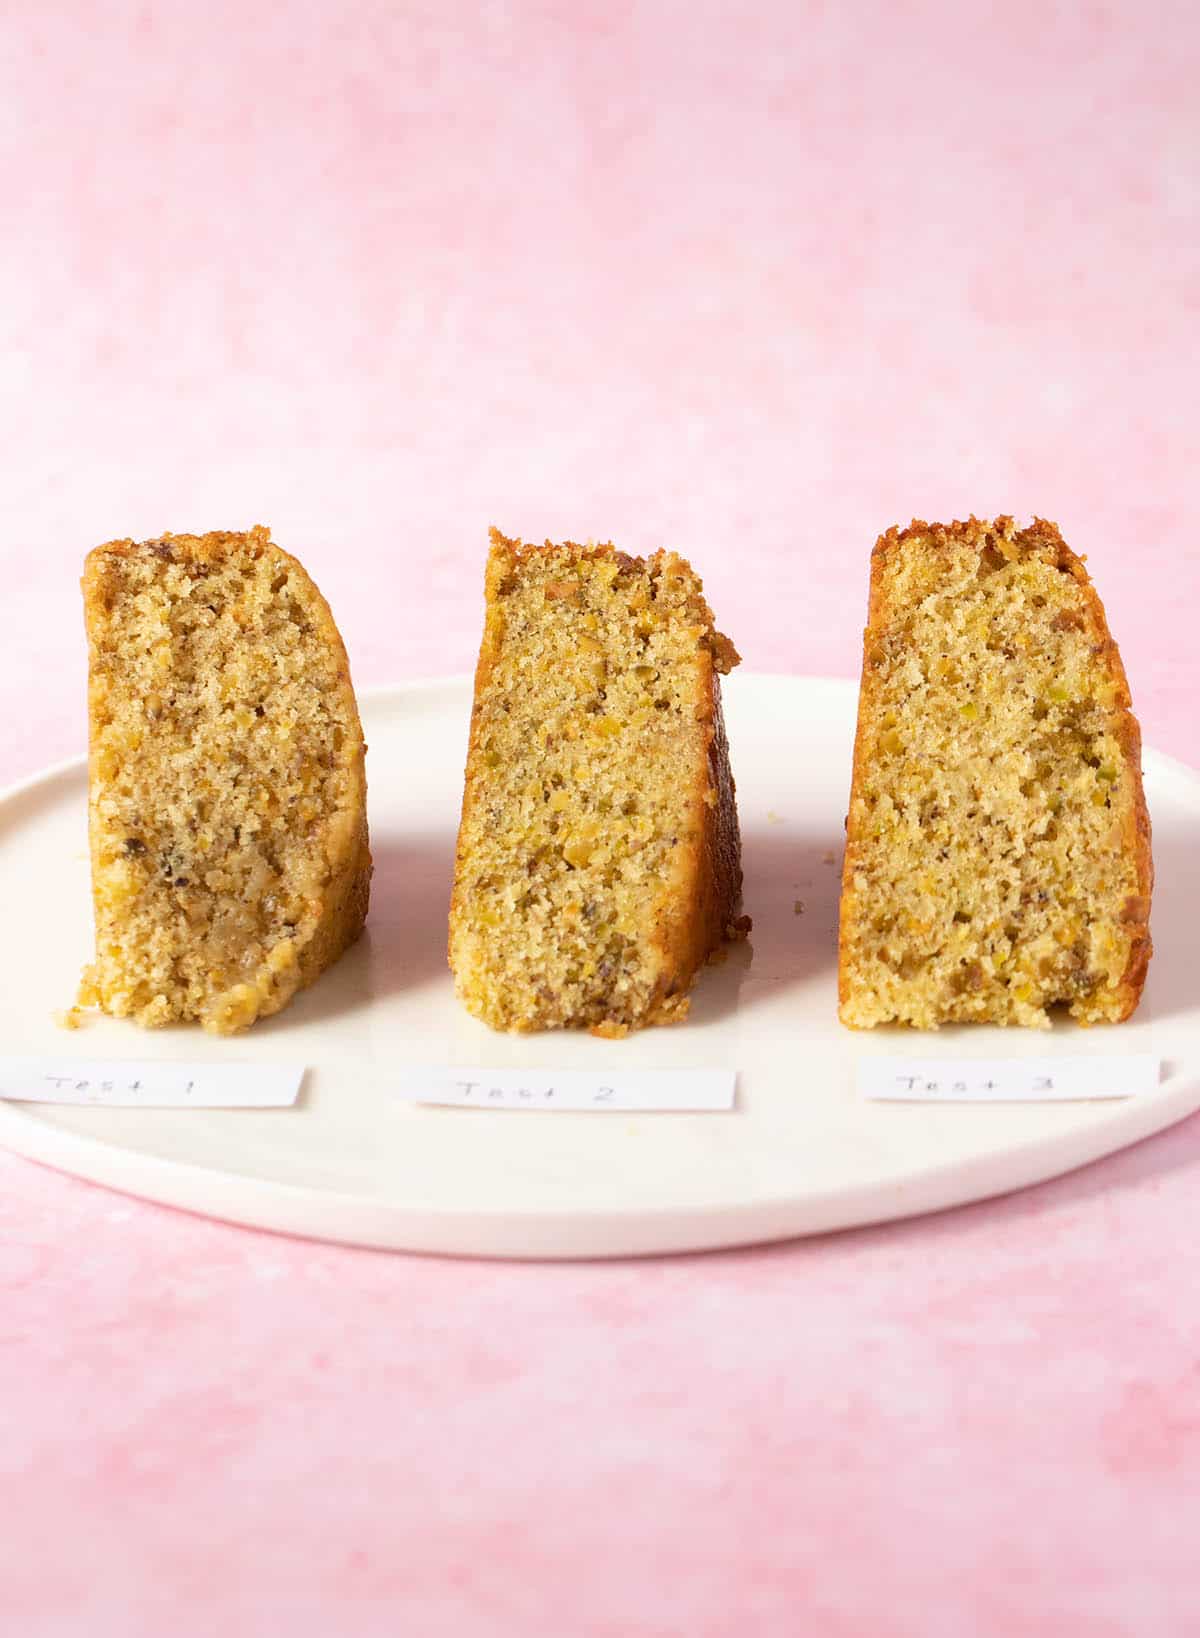 Three different slices of Pistachio Cake sitting on a pink background.